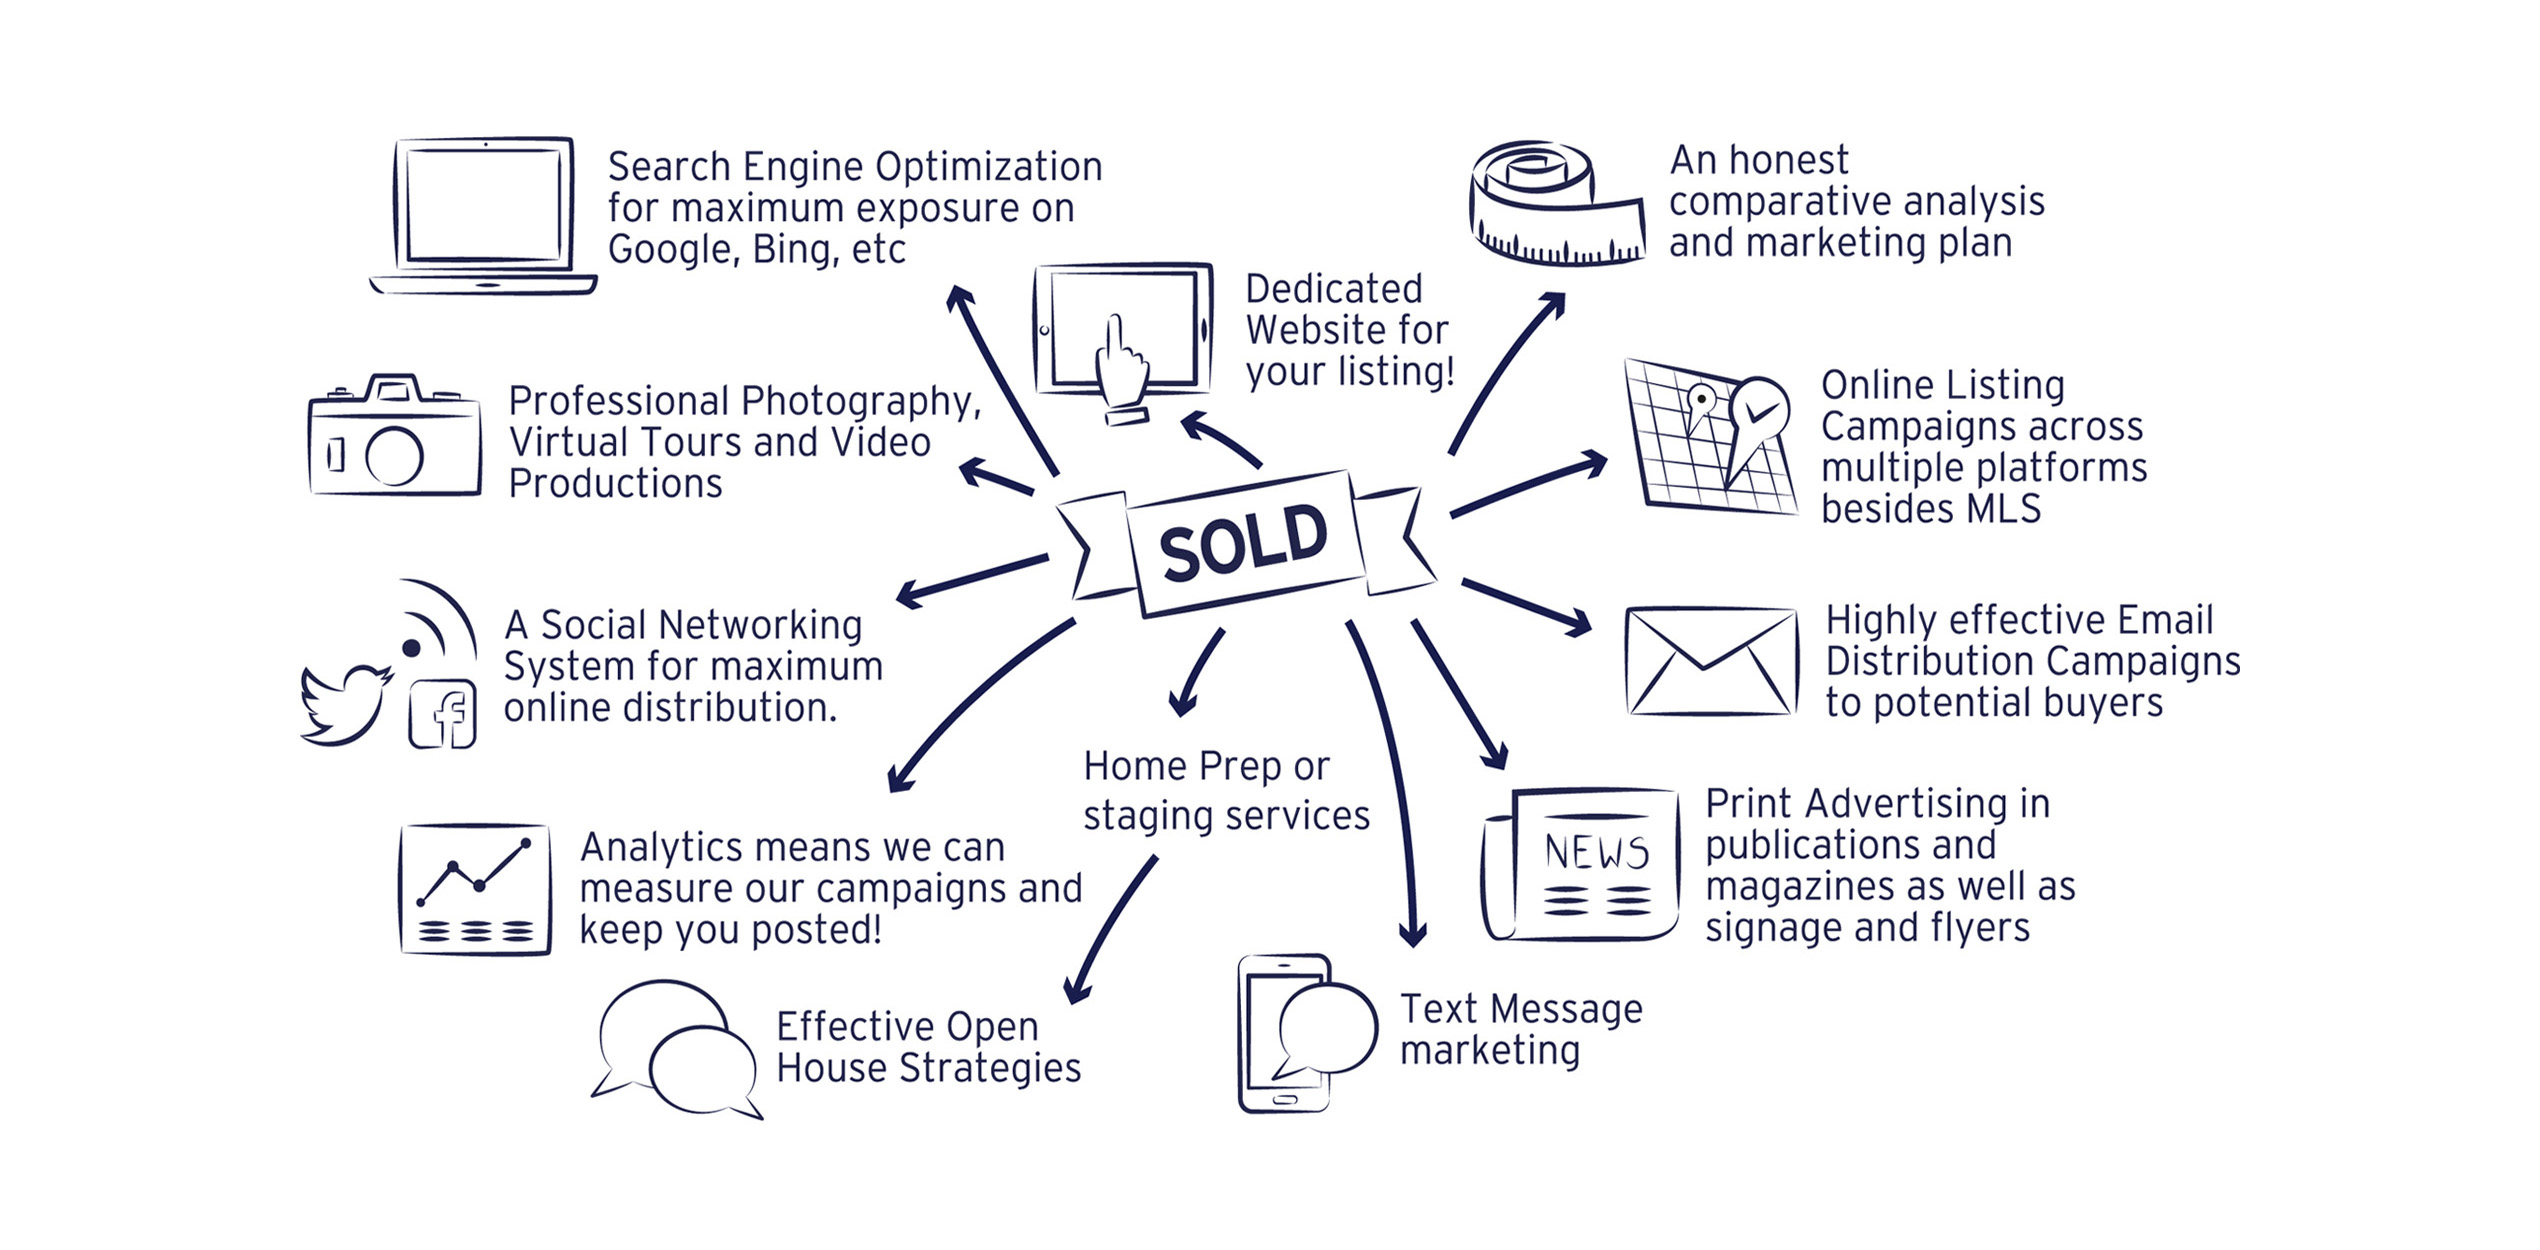 Real Estate Listing Marketing Plan | Template Business